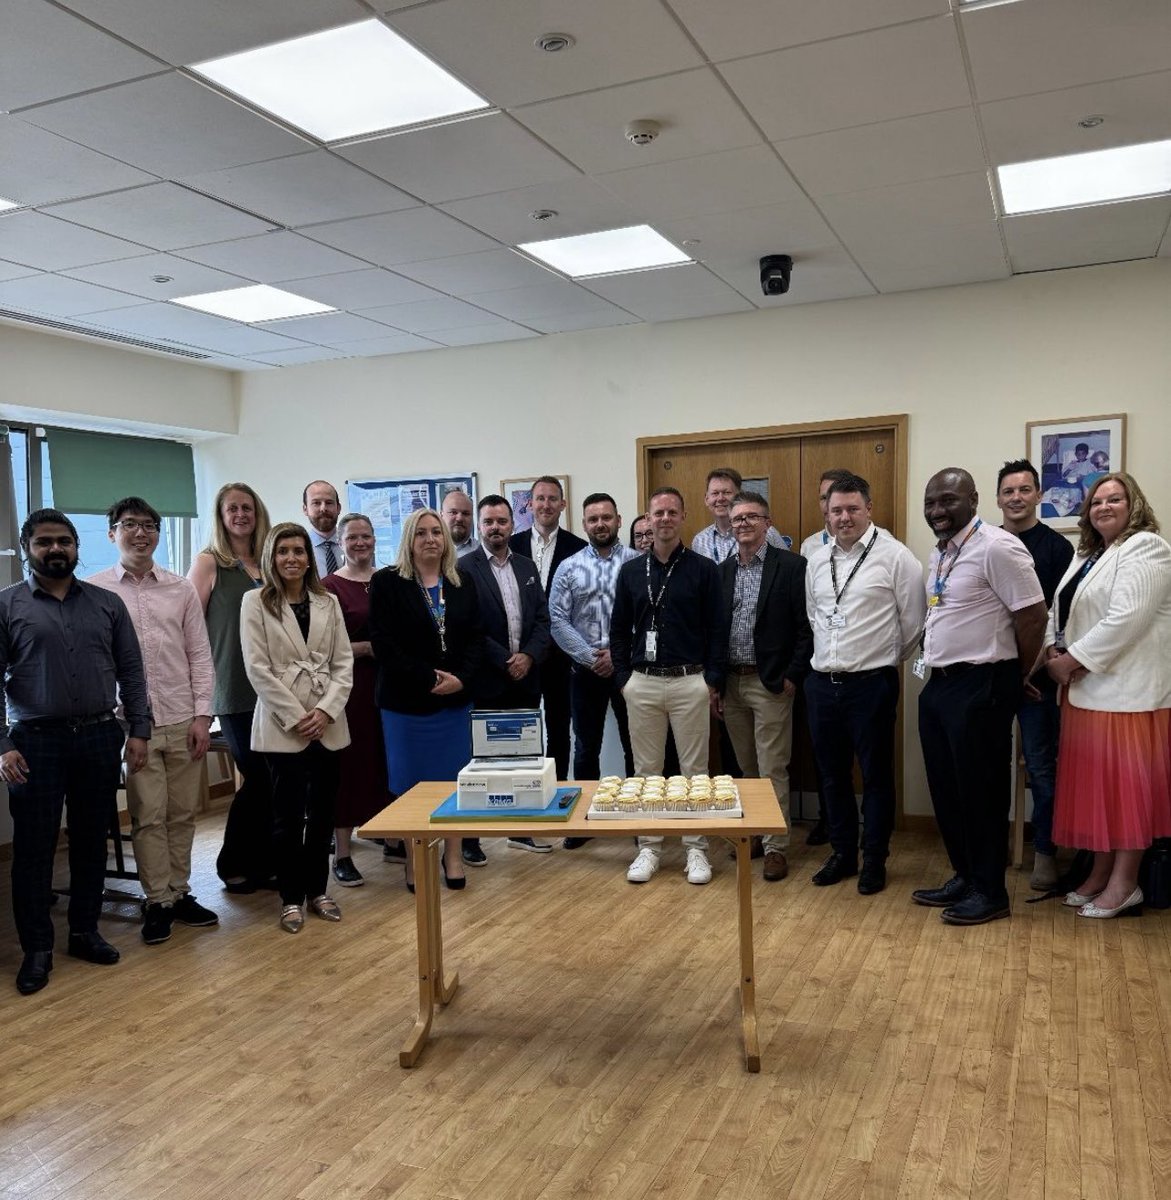 A digital integrated end to end leavers portal with 81% automation is now in place at @OUHospitals. Great team work. Every NHS Trust should have this imho @HPMA_National @TerryRoberts61 @mallen1_nhs @ServiceNow @kpmguk @hrmagazine @HR_Nate_ saving money, improving people services